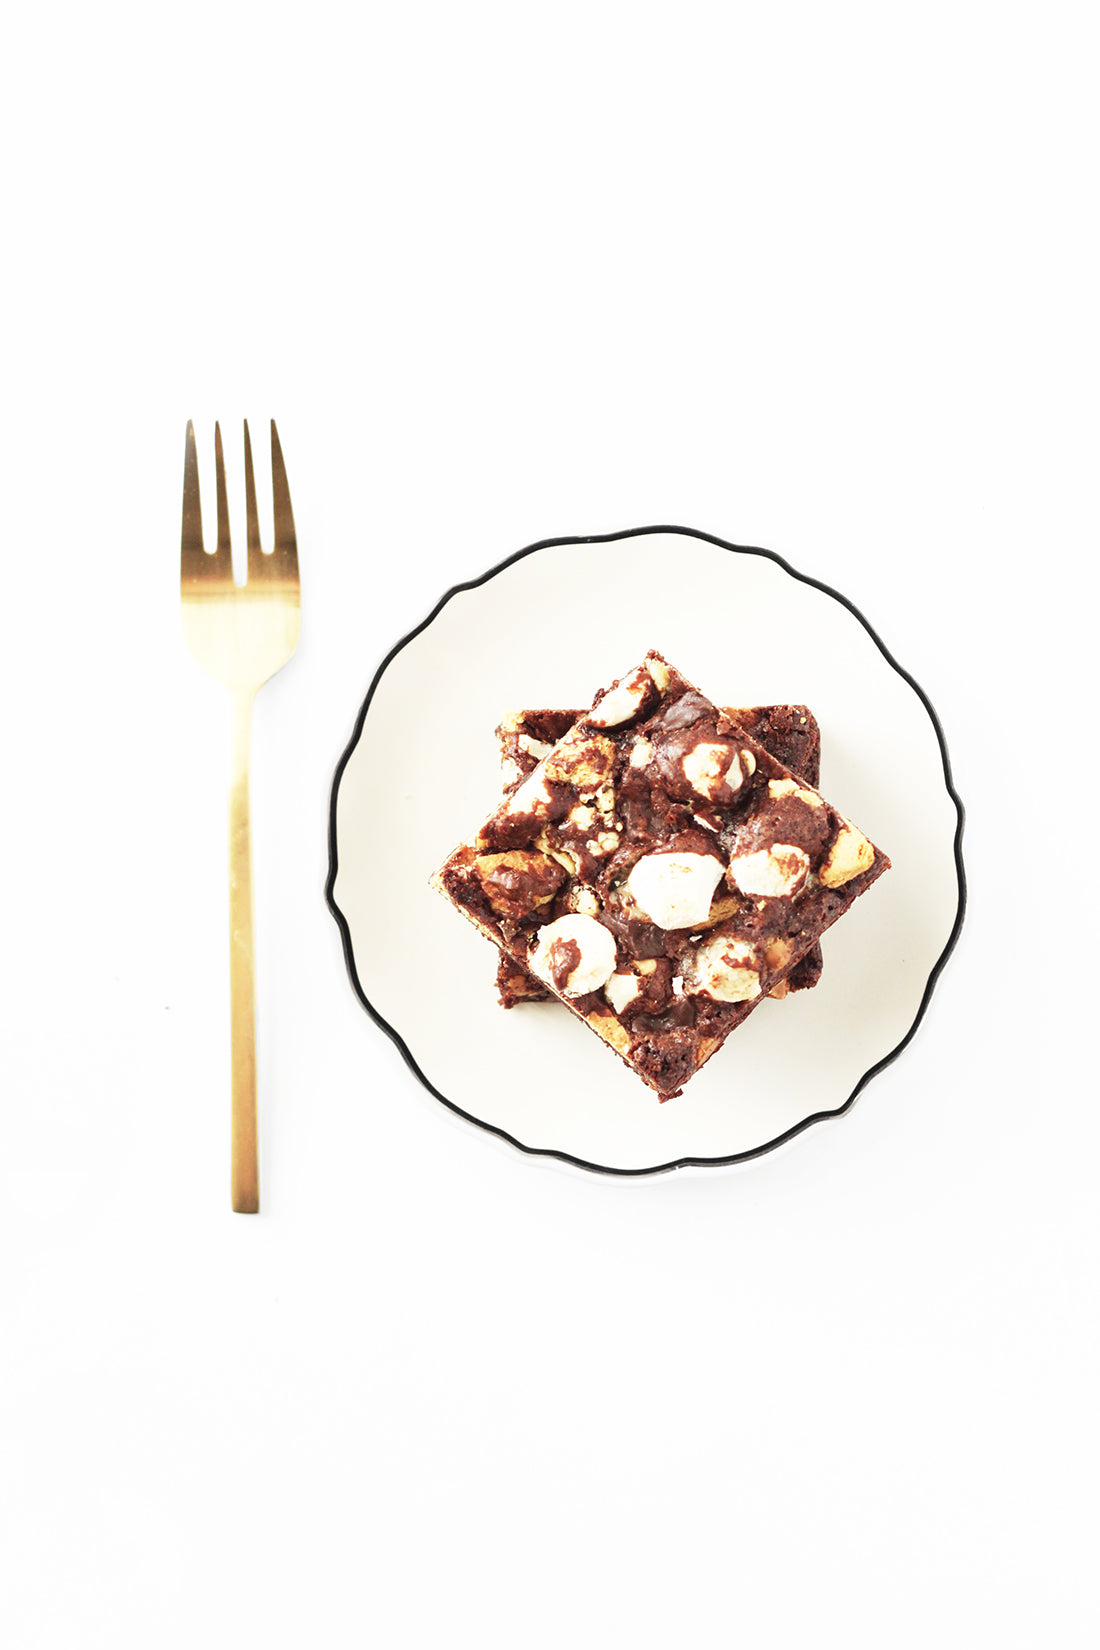 Image of two Miss Jones Baking Co Campfire Smores Brownies stacked on a plate next to a golden fork